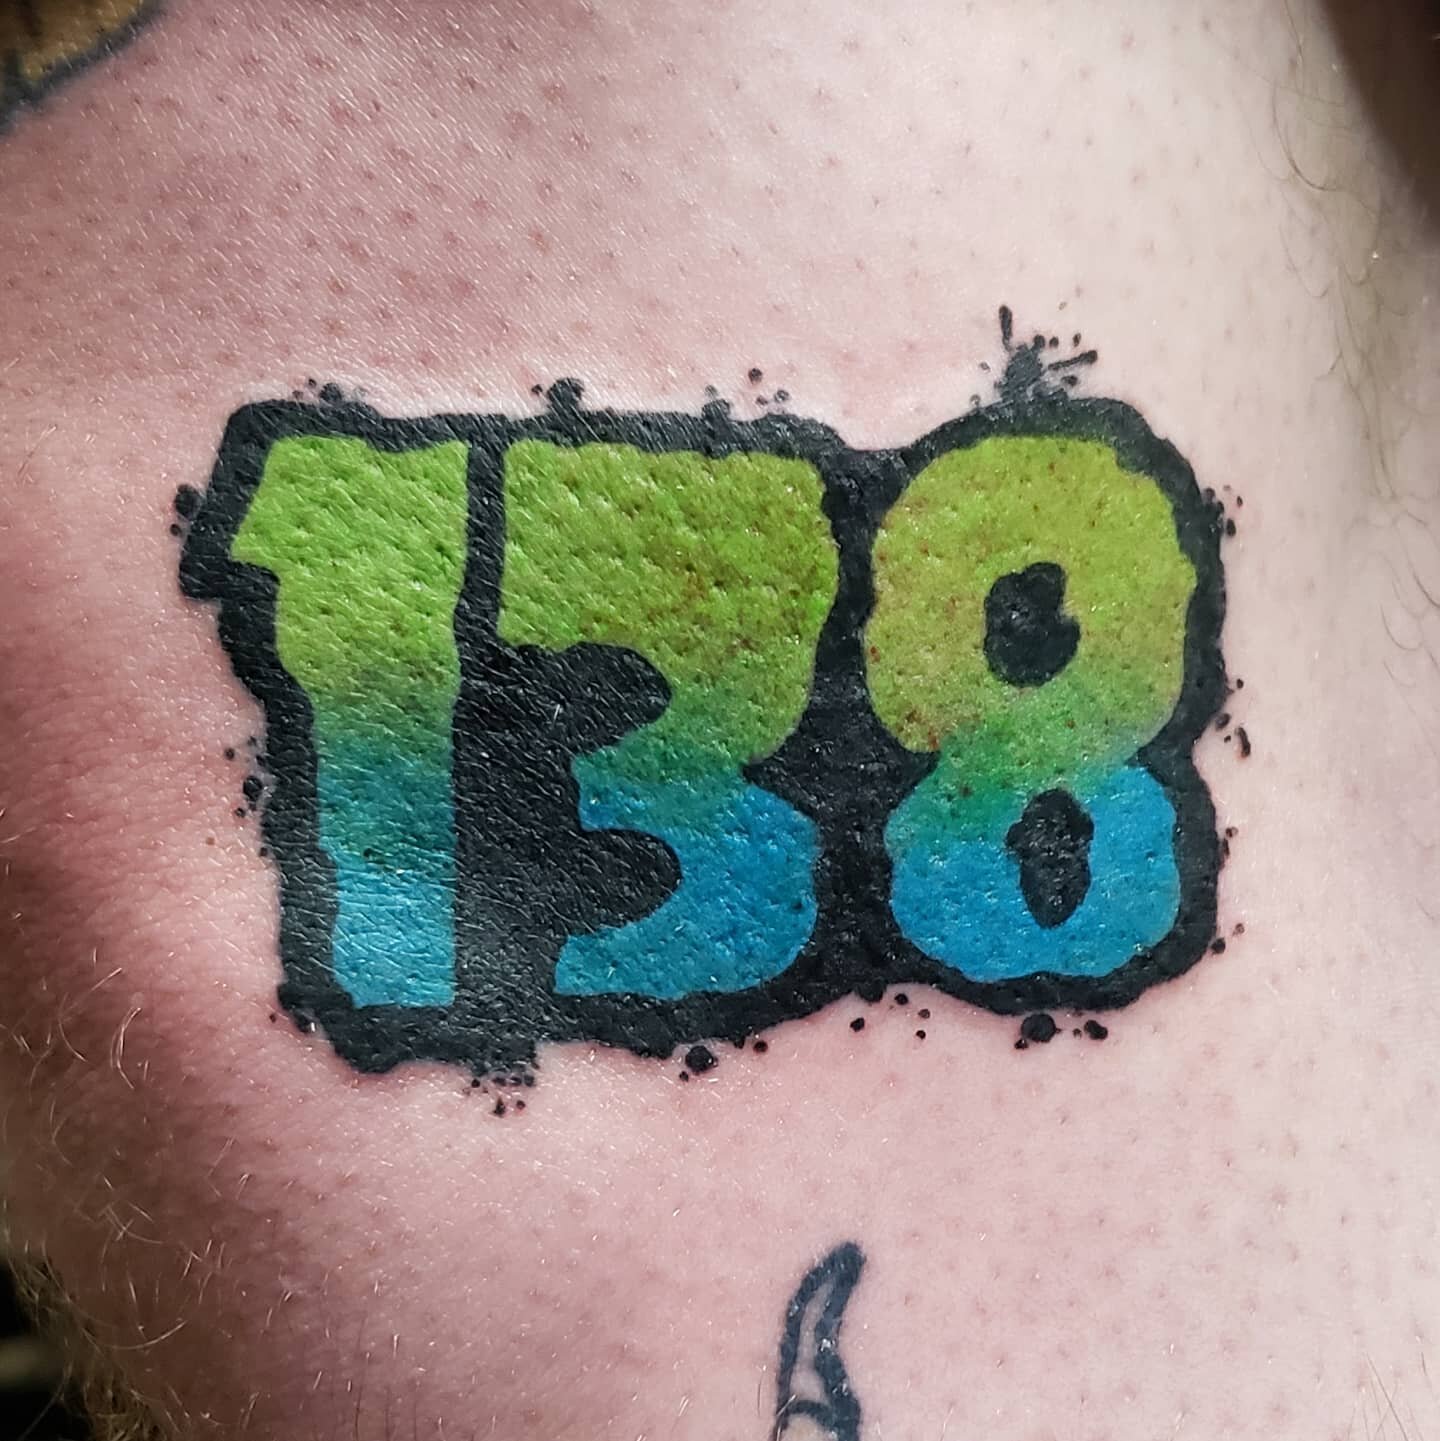 HUGE thank you to @bdobiastattoos for letting me give him this sick 138! If you don't follow him, you're fuckin up!